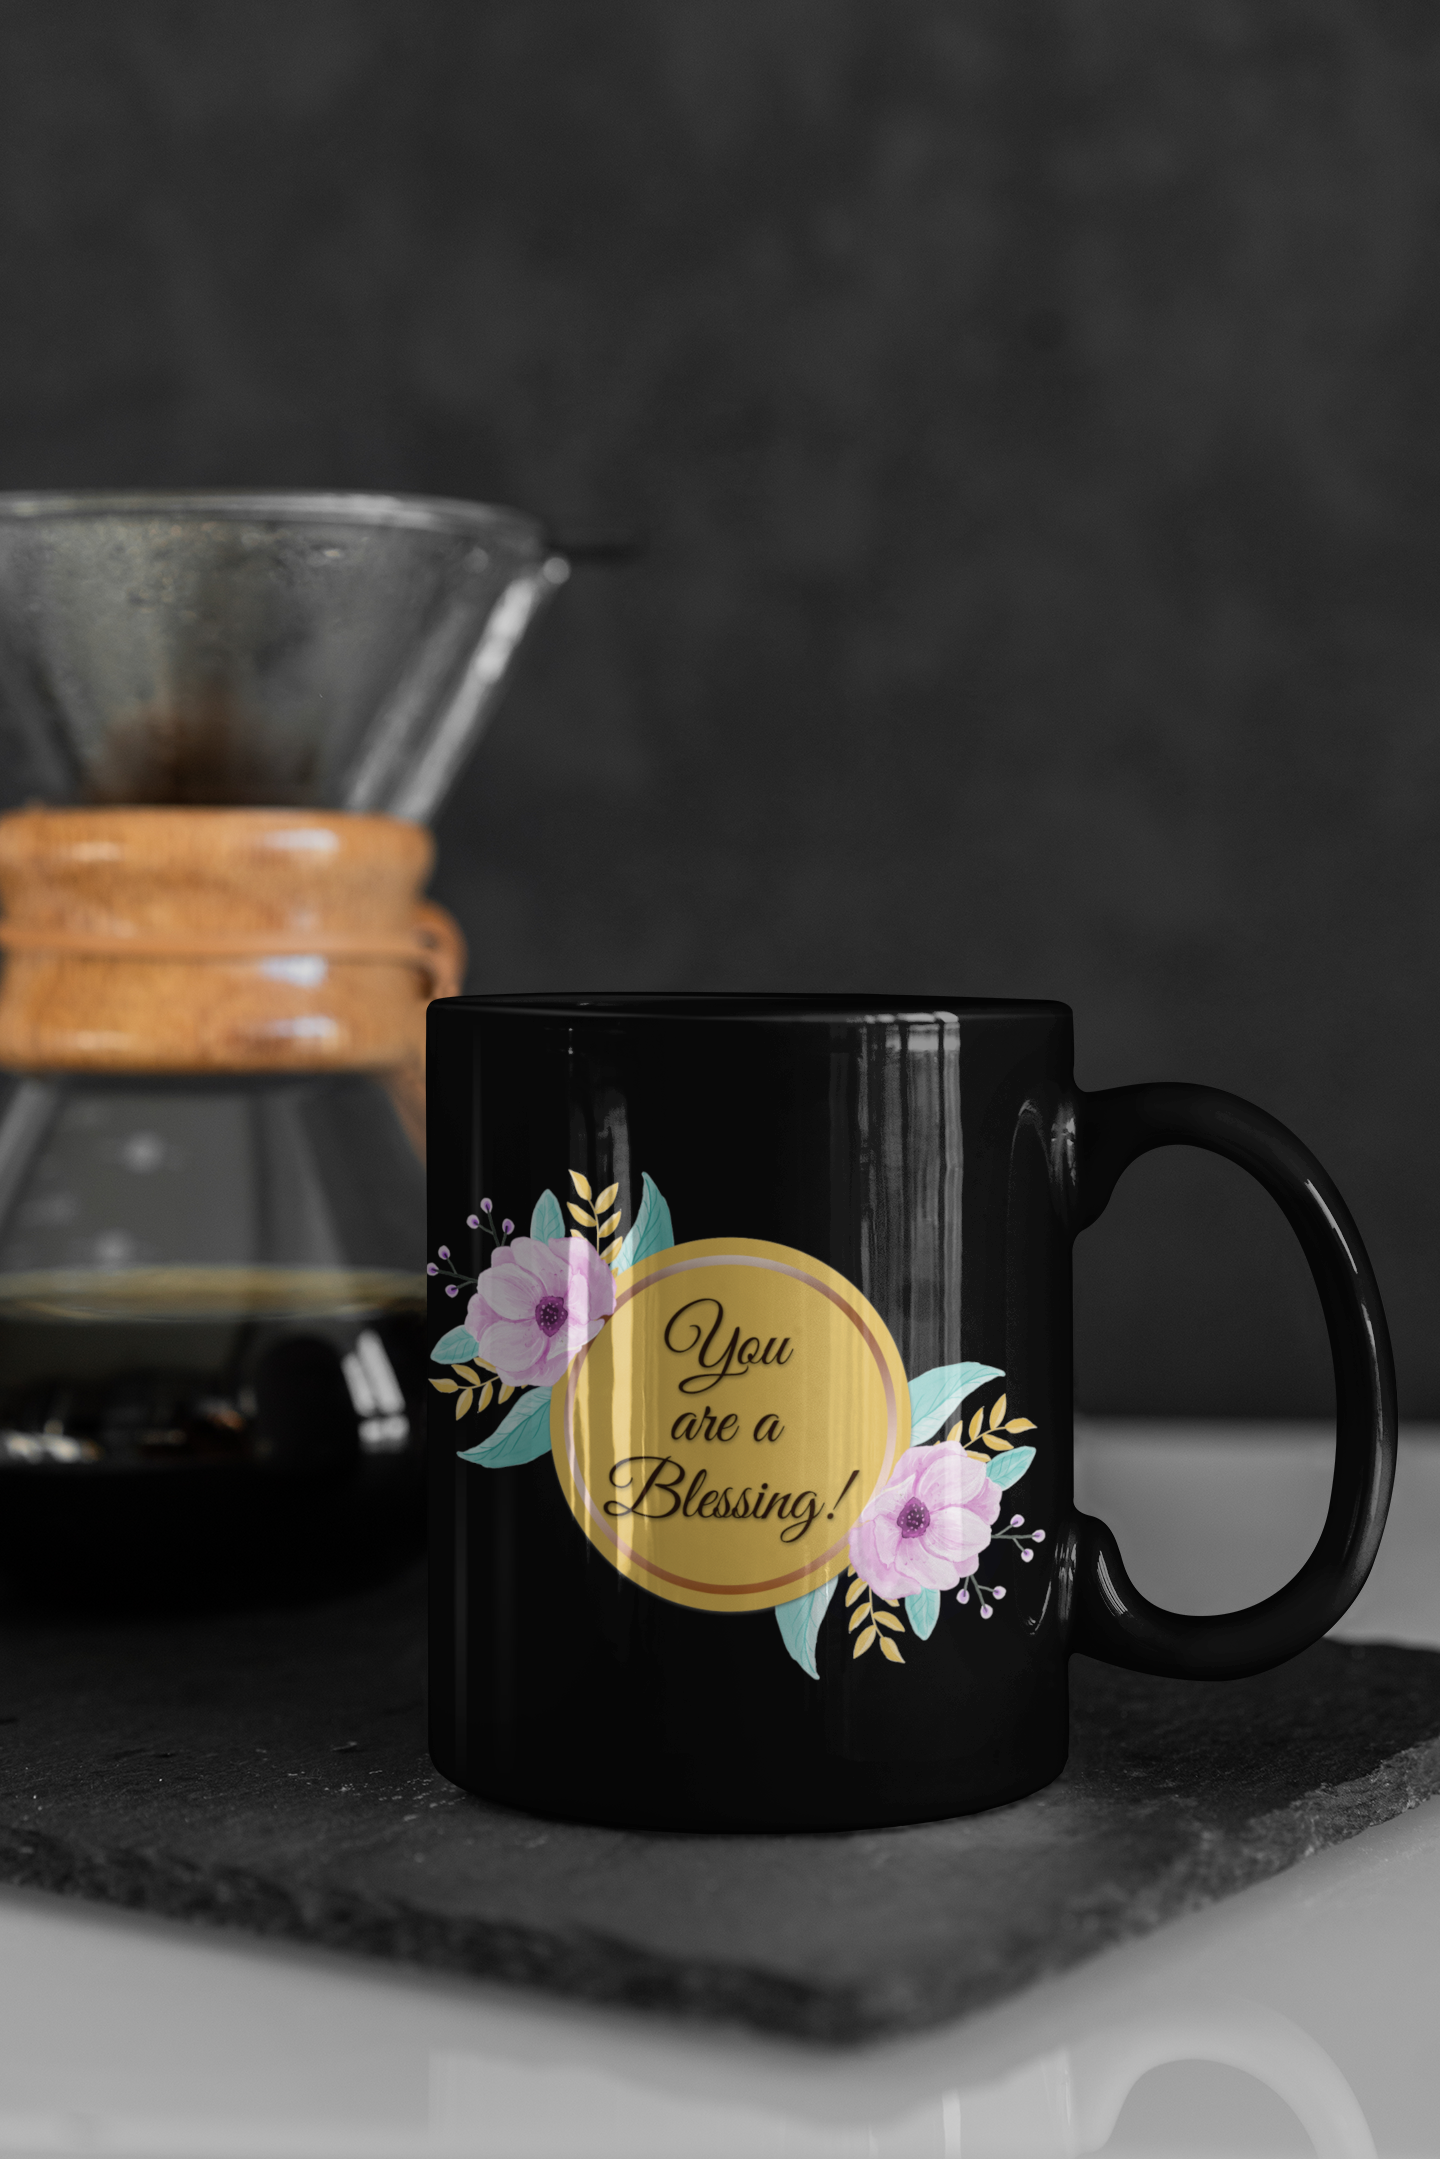 You are a Blessing! (black) - Coffee Mugs